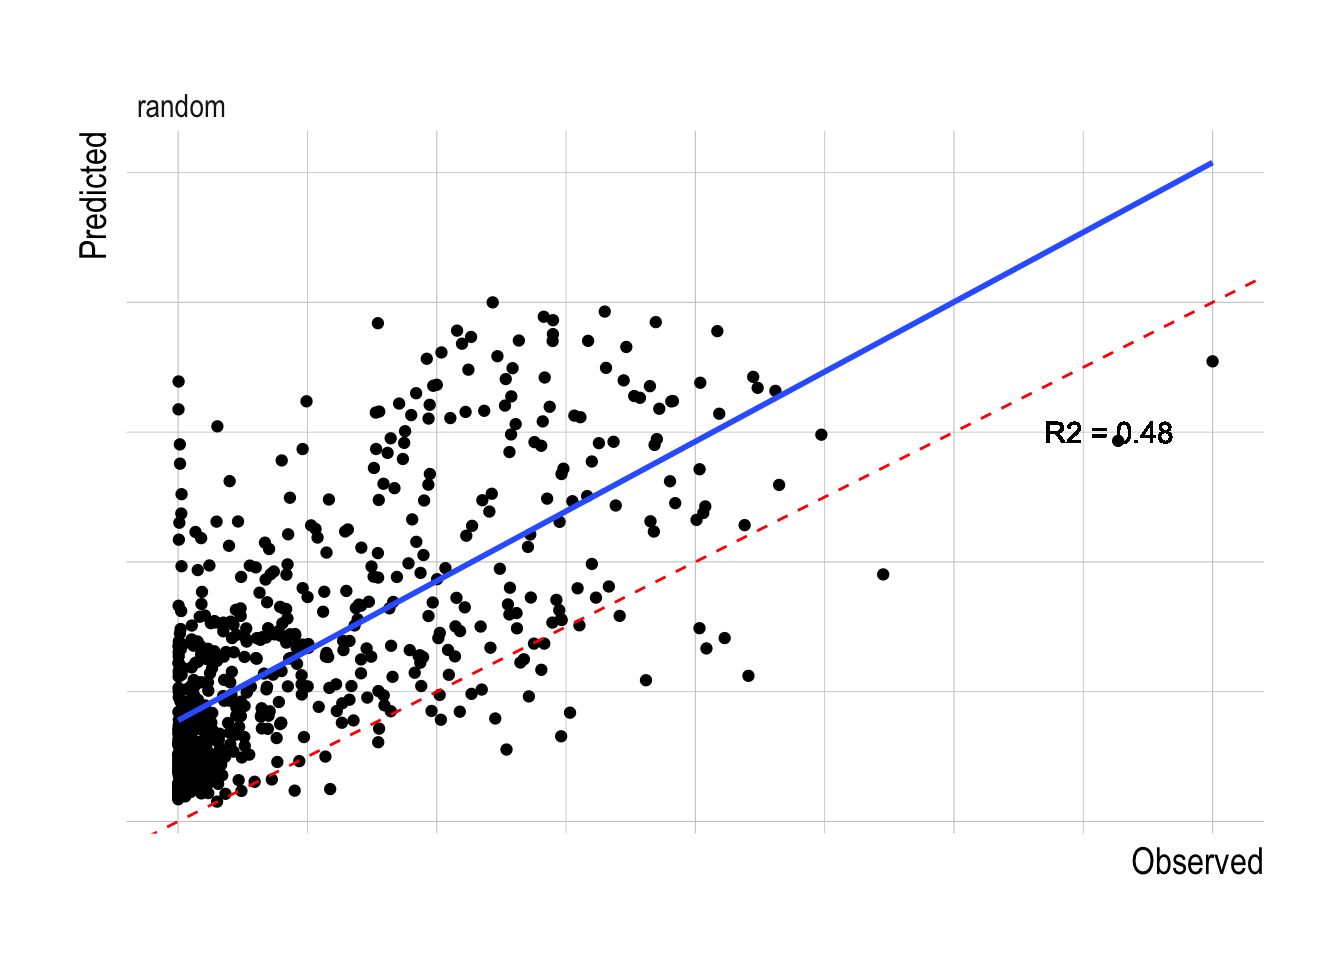 Observed vs predicted biomass for the fitted random forest models across different evaluated data splits. Red dashed lines indicates 1:1 fit, blue line a fitted linear model to the observed and predicted values